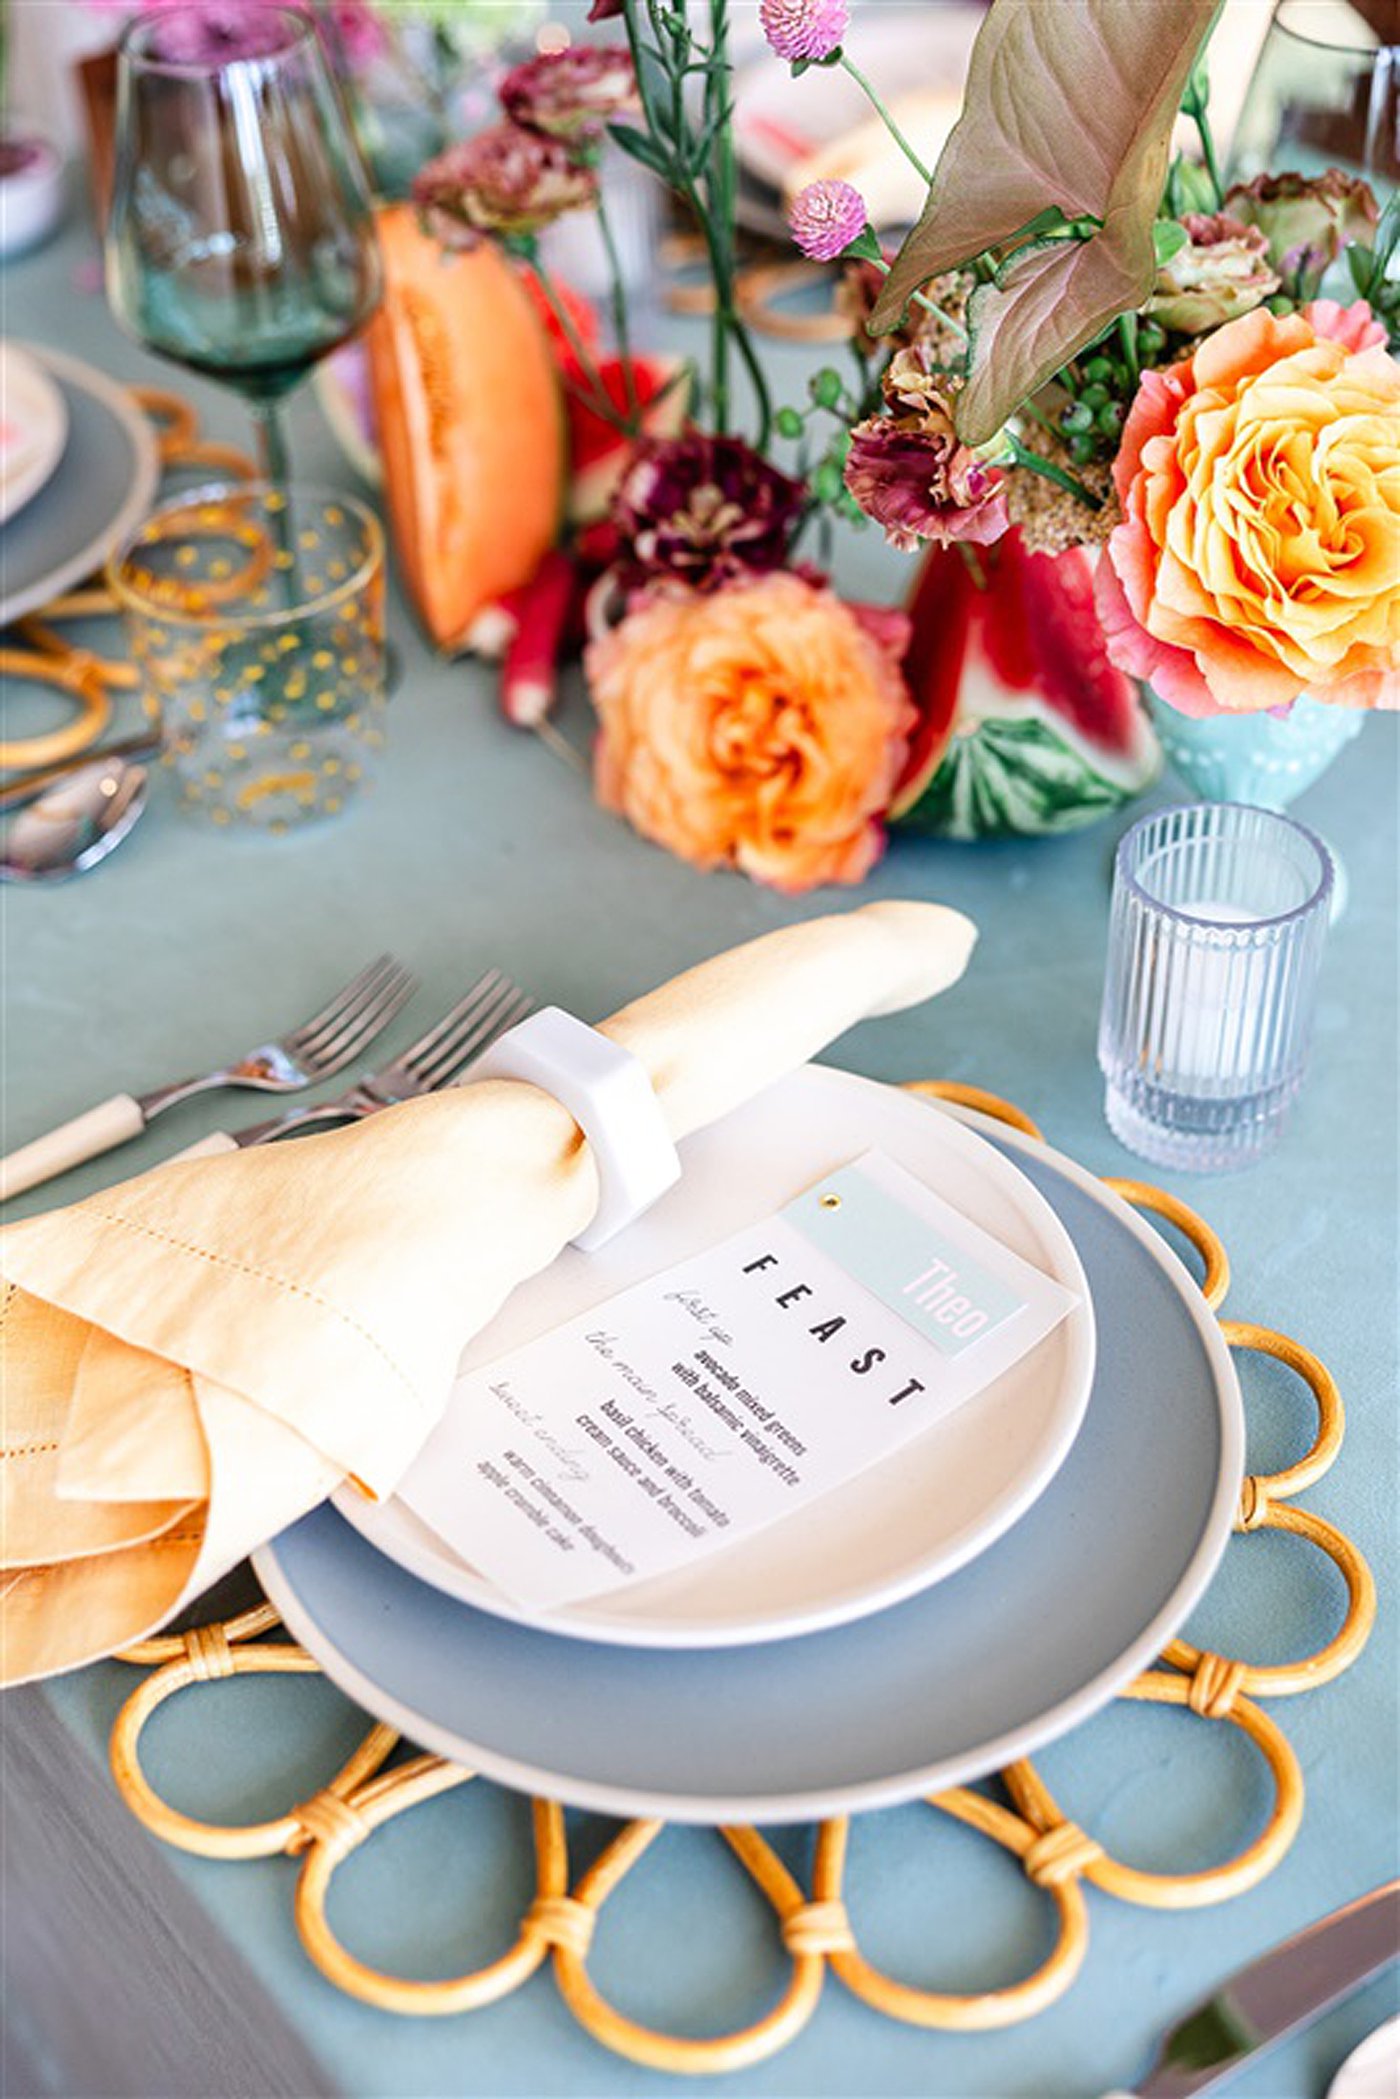 A sustainable wedding table setting with plates and napkins on a blue table.